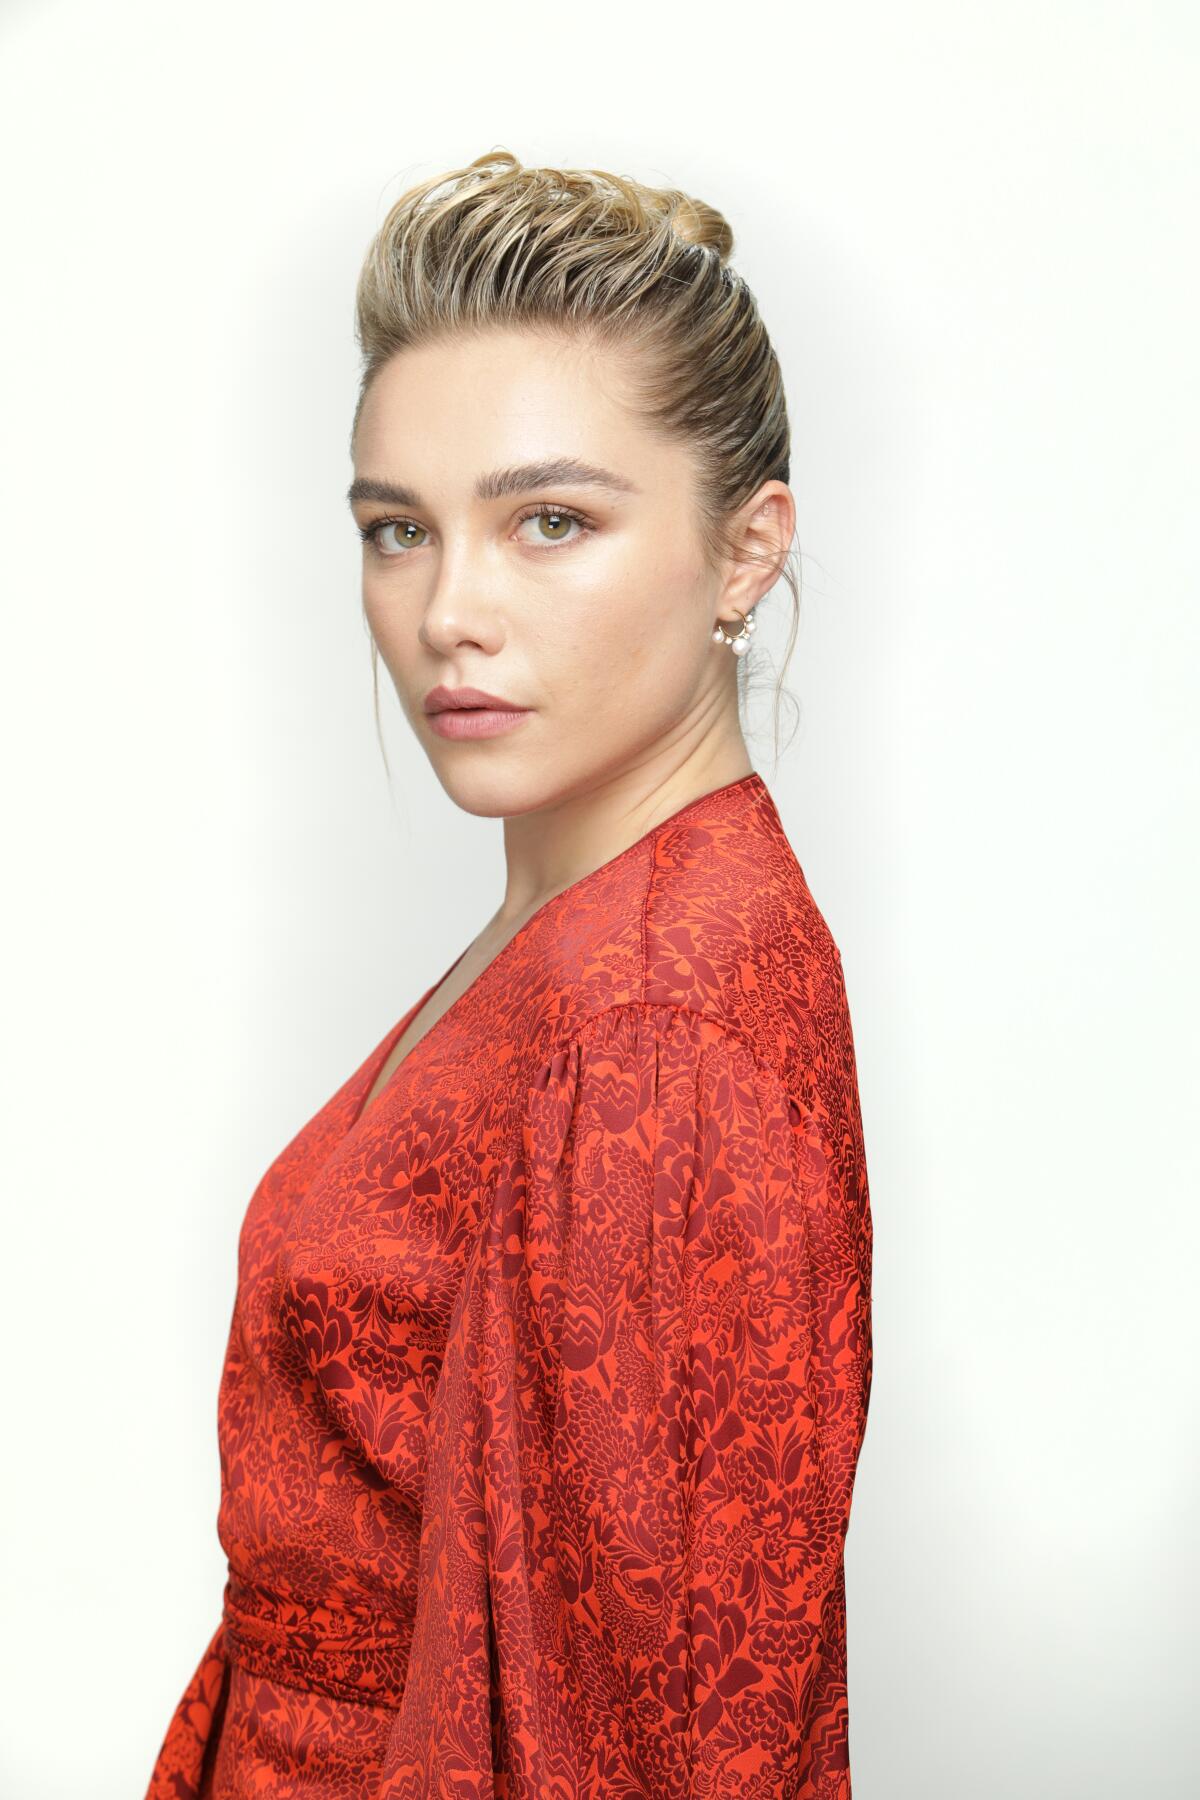 Florence Pugh is nominated in the supporting actress category for her role in "Little Women."